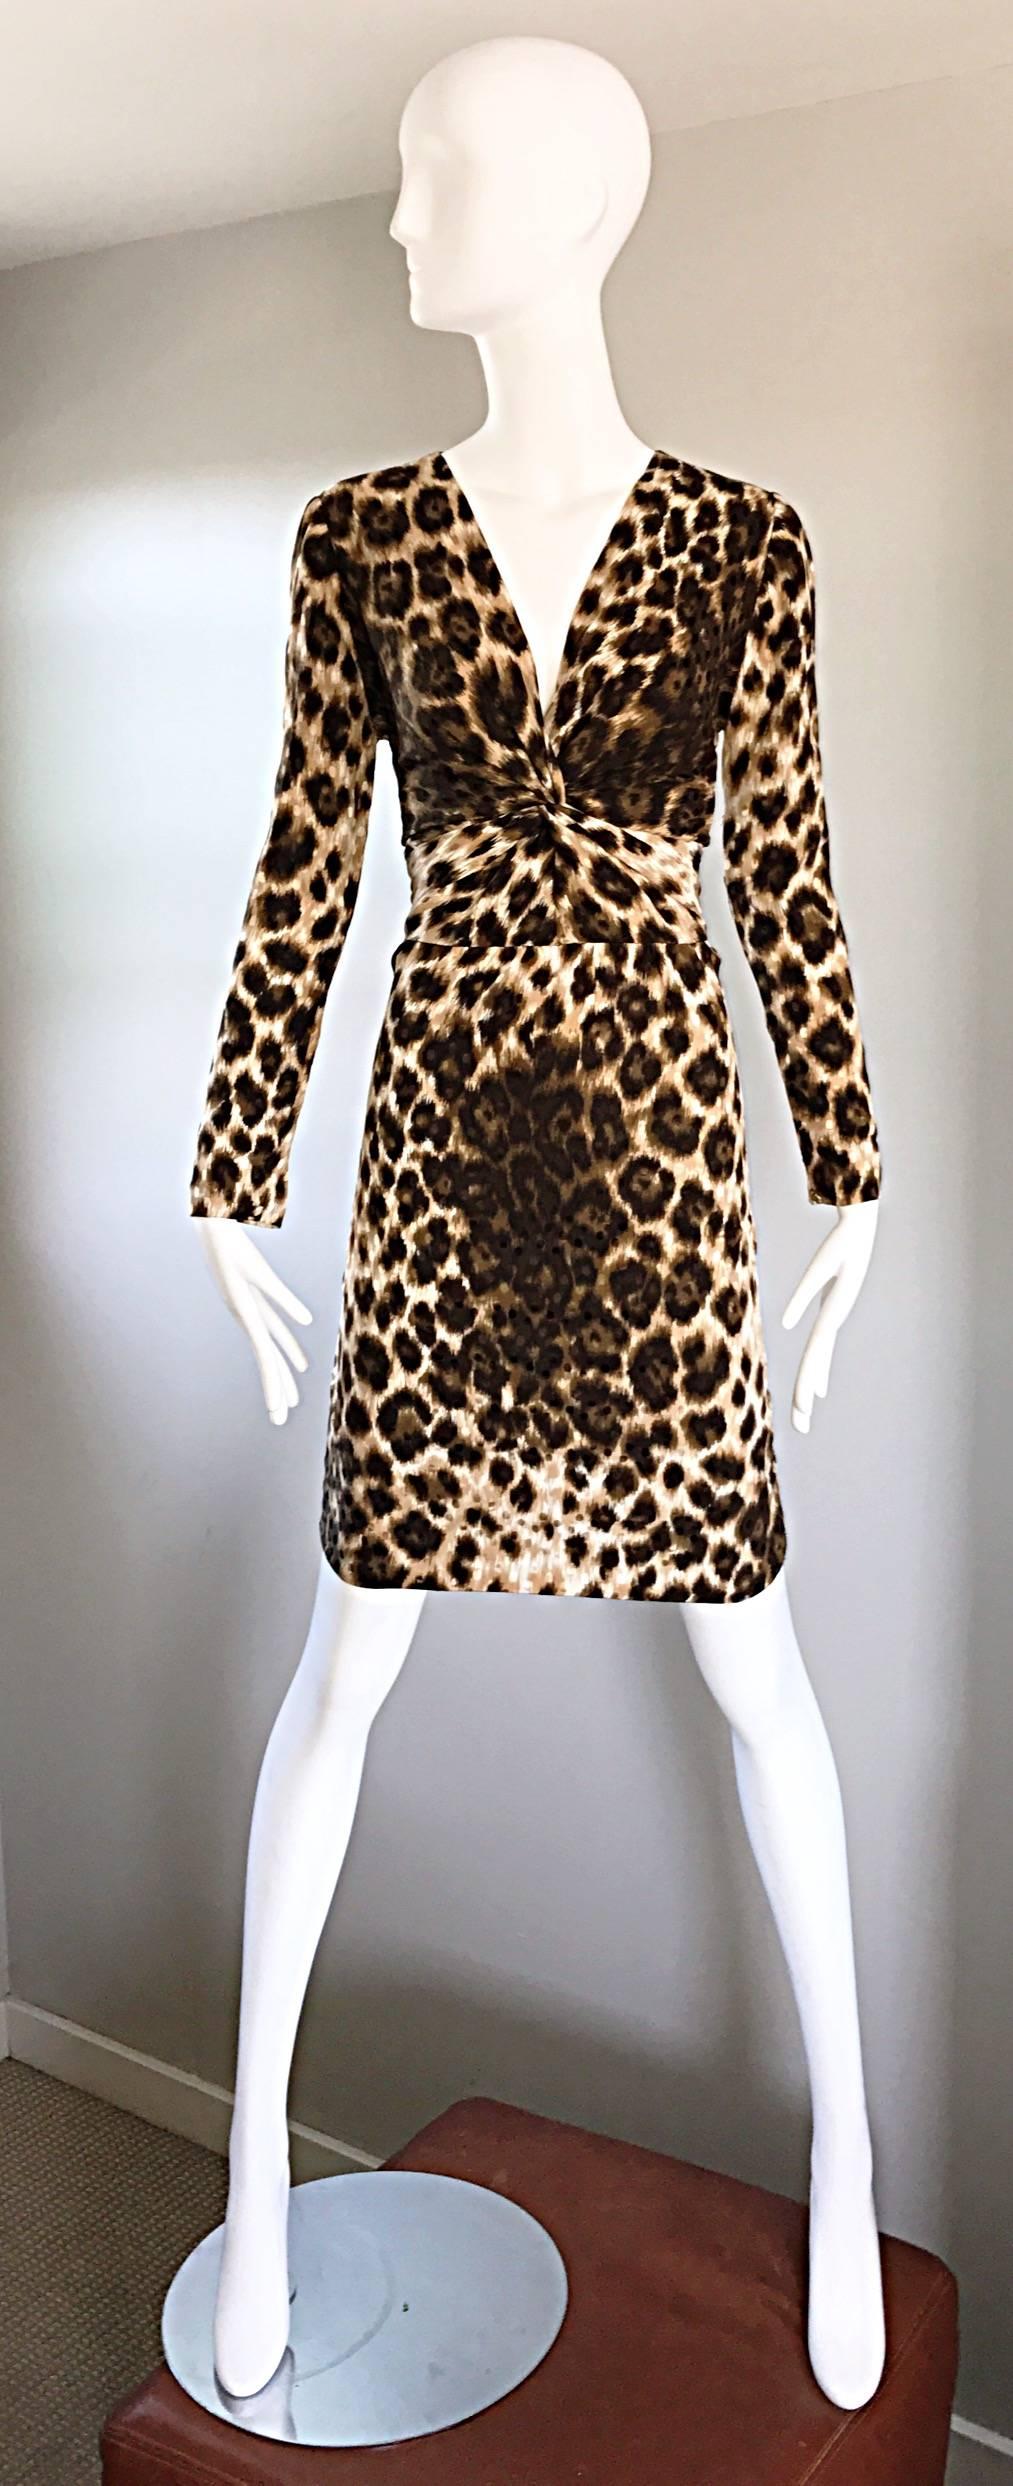 Sexy and rare vintage GIVENCHY by ALEXANDER MCQUEEN animal print silk dress! Features a stunning leopard / cheetah print throughout in browns, tans, and beige. Flattering rushing detail at waist and bottom bust. Sleek long sleeves, with a tailored